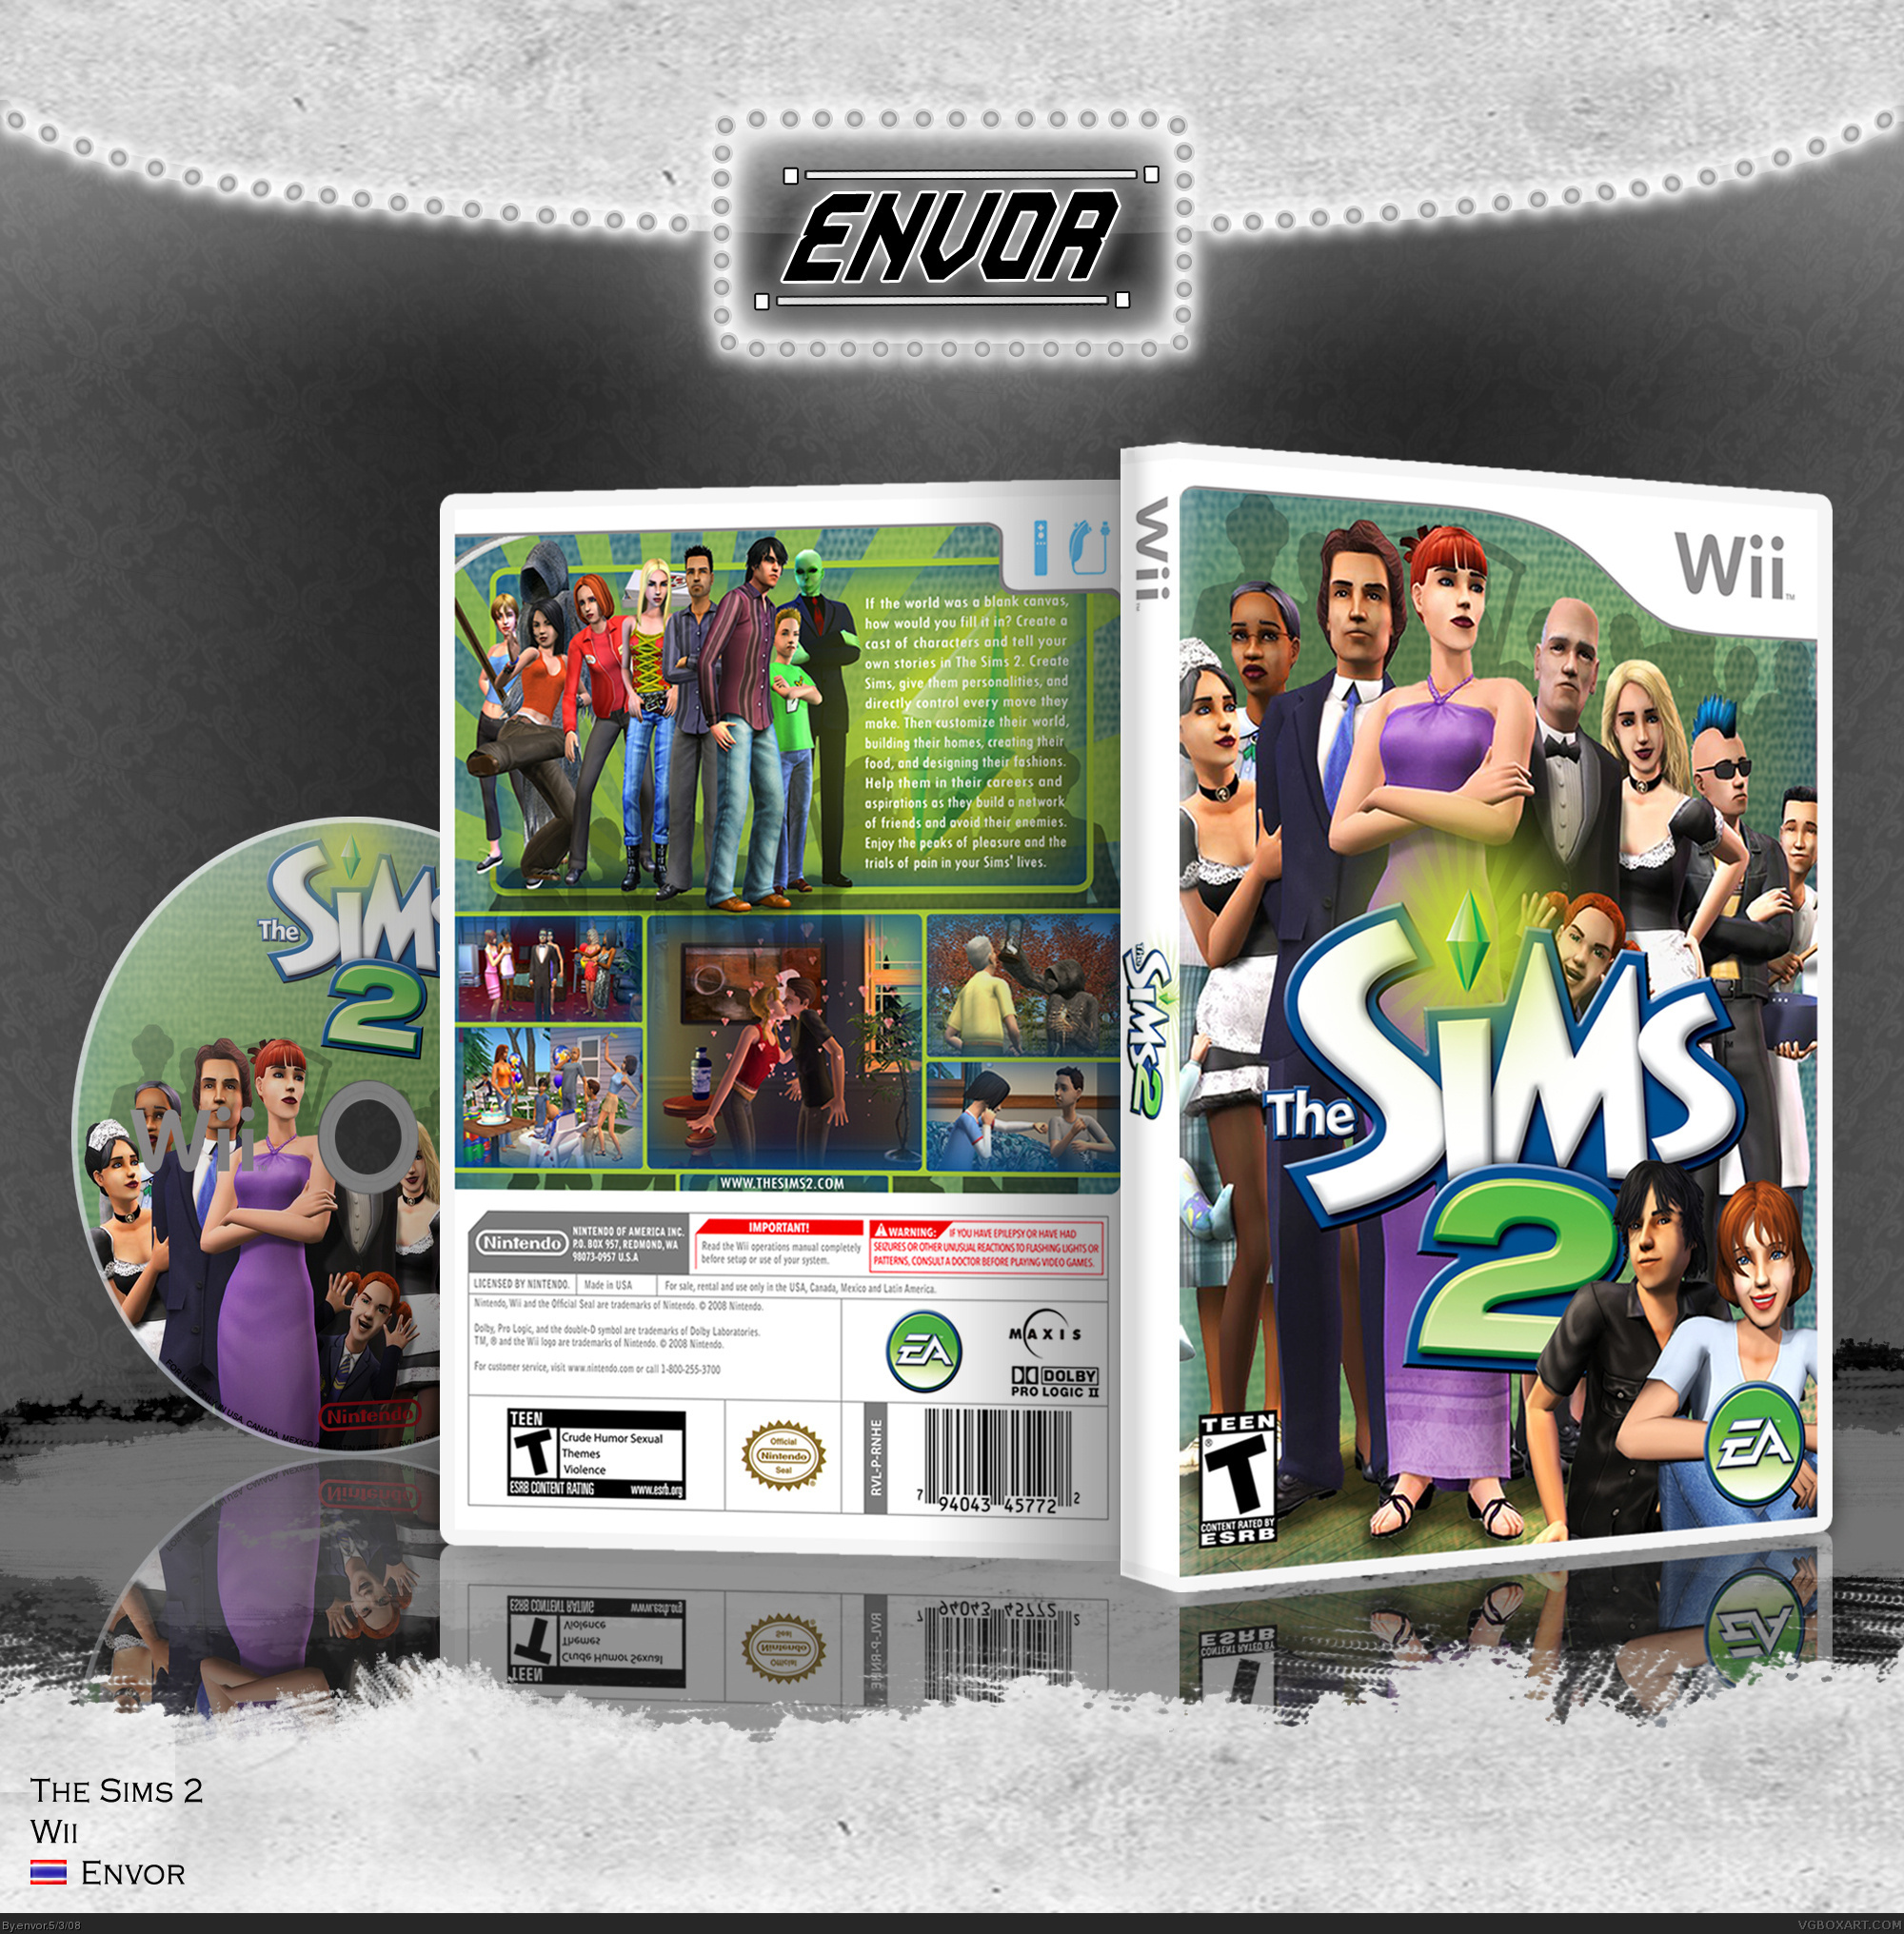 The Sims 2 box cover